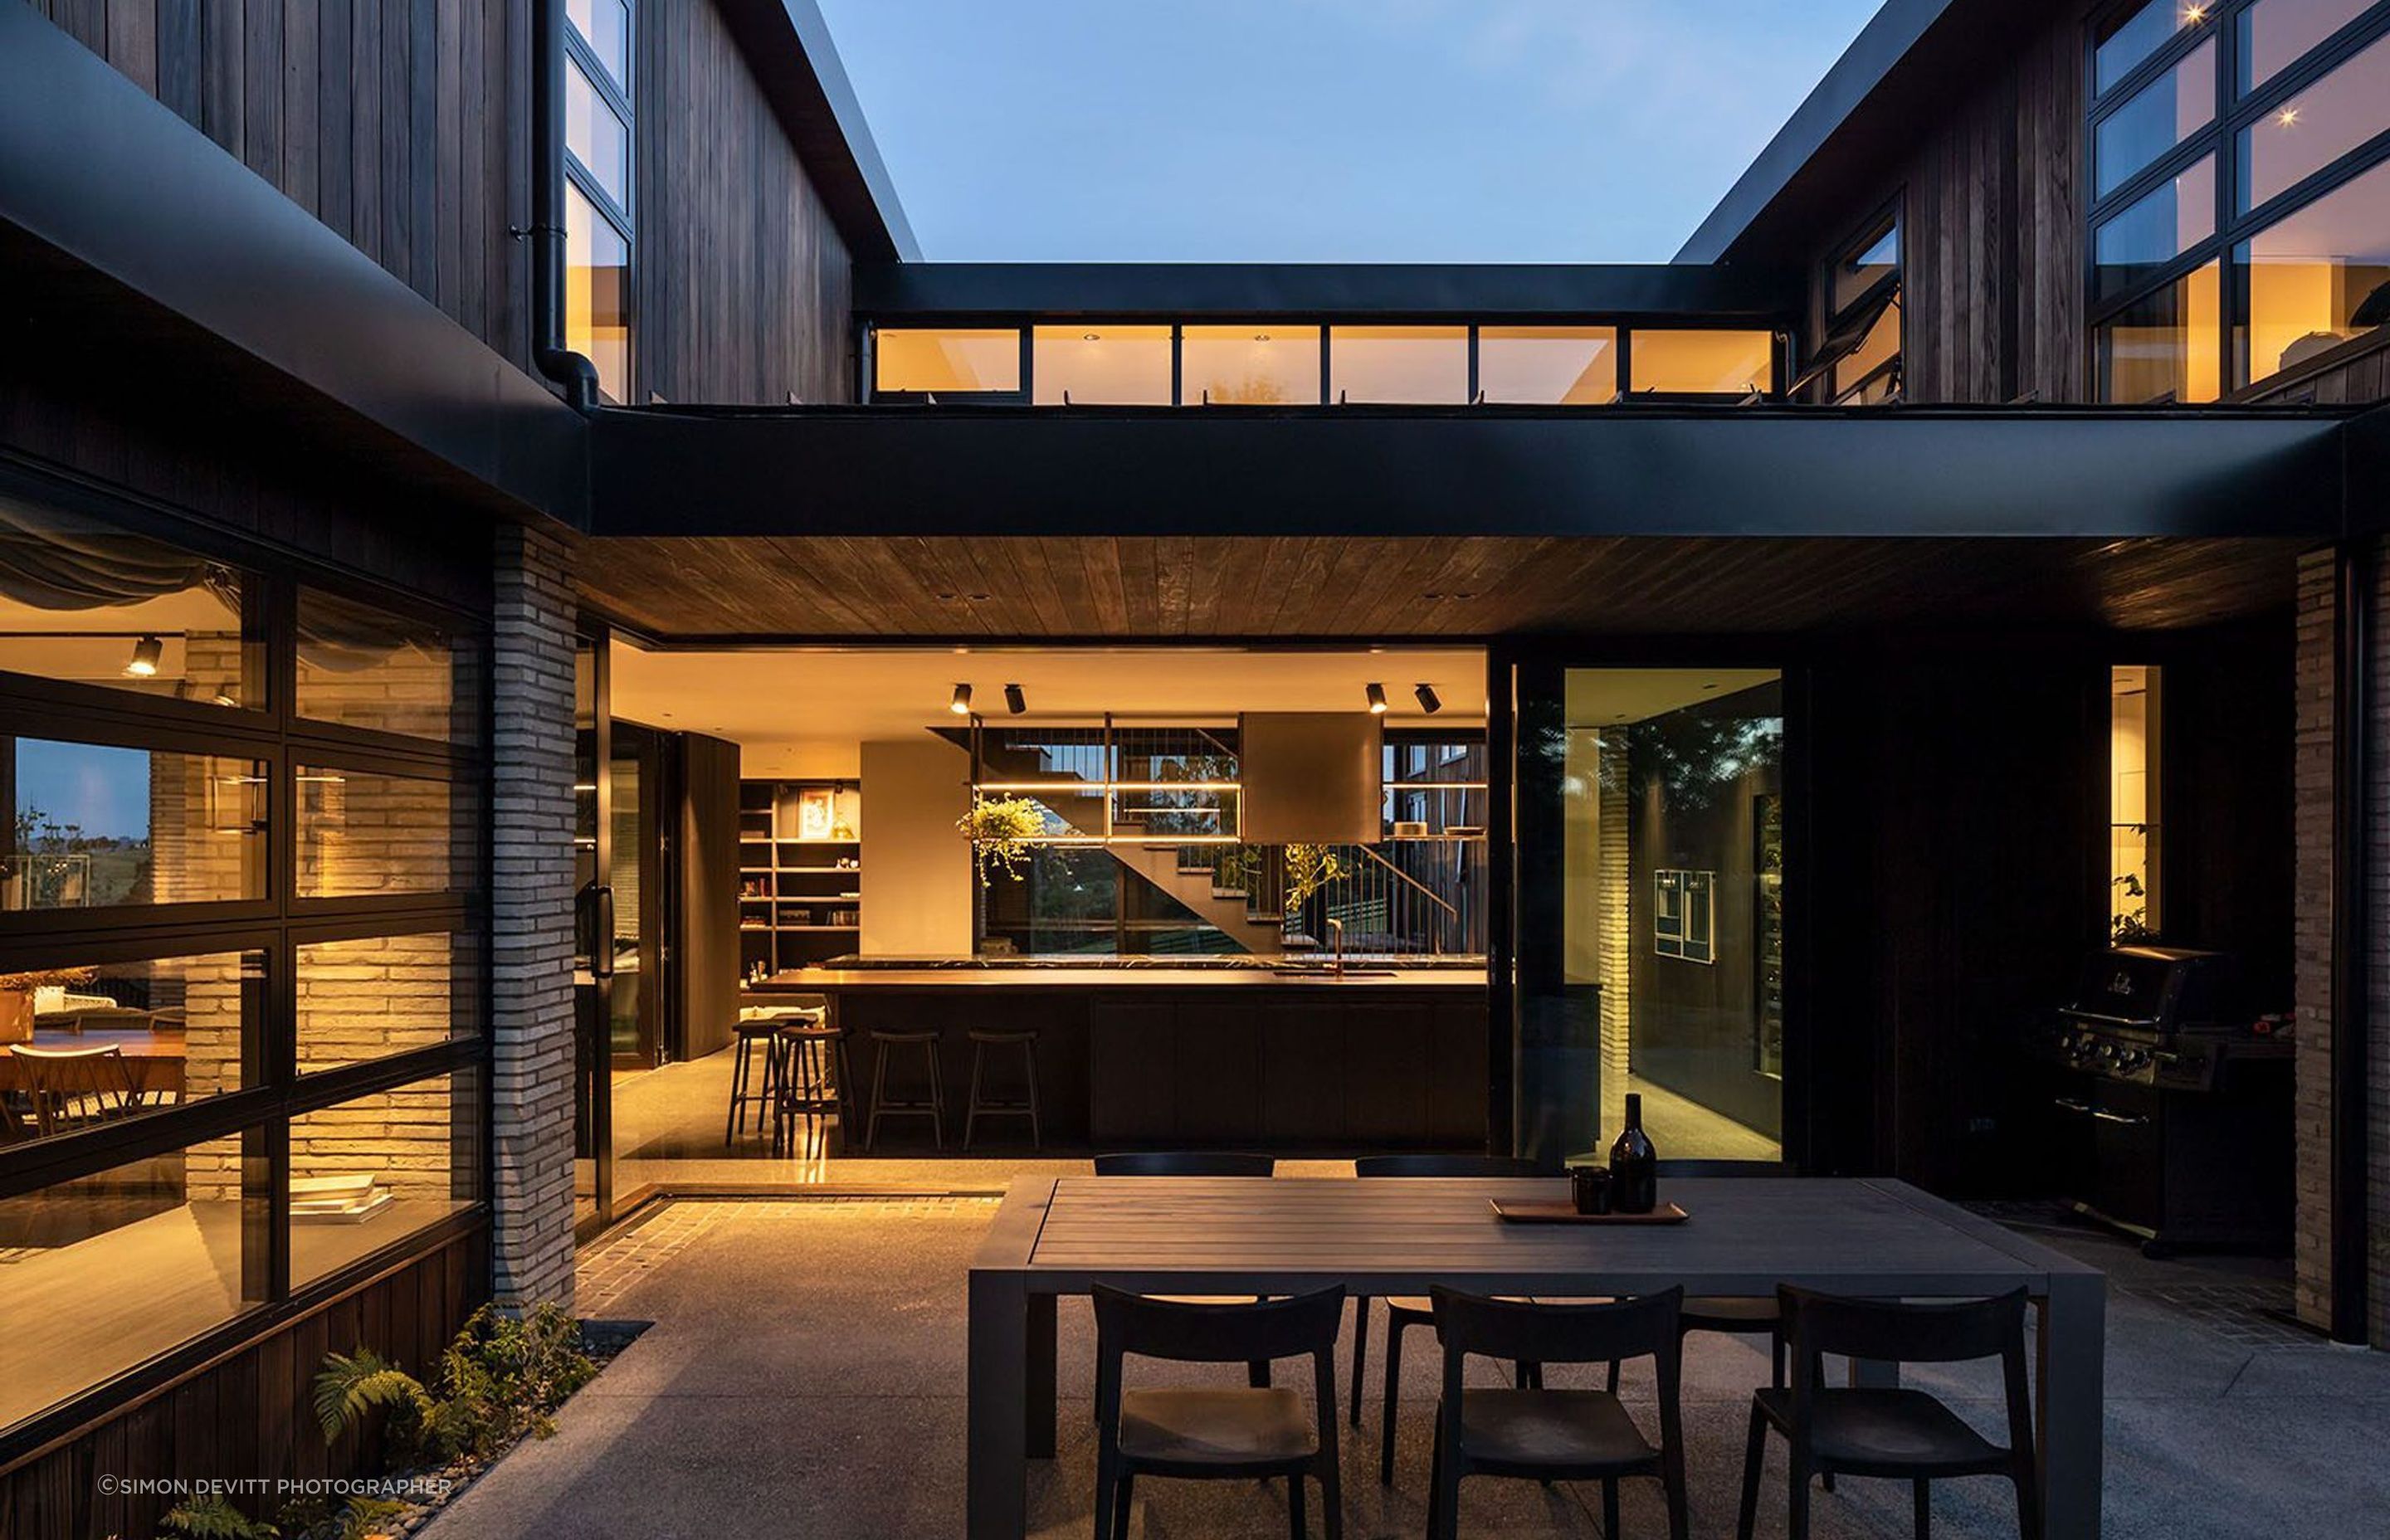 The architects wanted to sew the landscape into the structure, and achieved that with the use of multiple courtyards that connect spaces both with each other and with the site and wider surrounds.